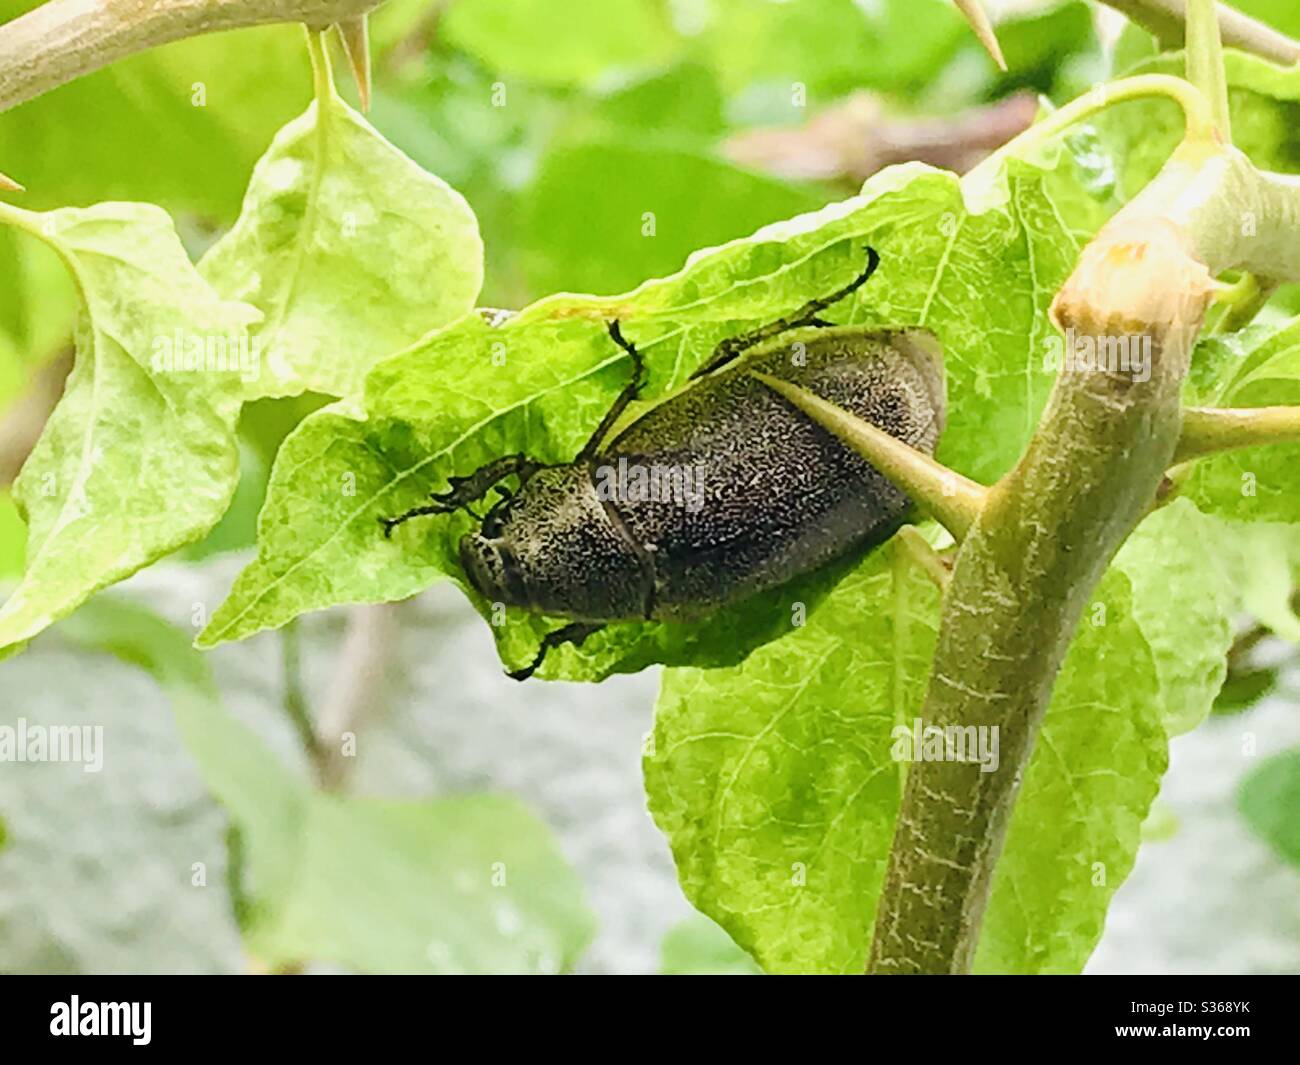 On a rainy quarantine morning, a beetle finds refuge under the leaf and thorn of bougainvillea. What a captivating moment to be still and simply gaze at nature’s splendor. Stock Photo